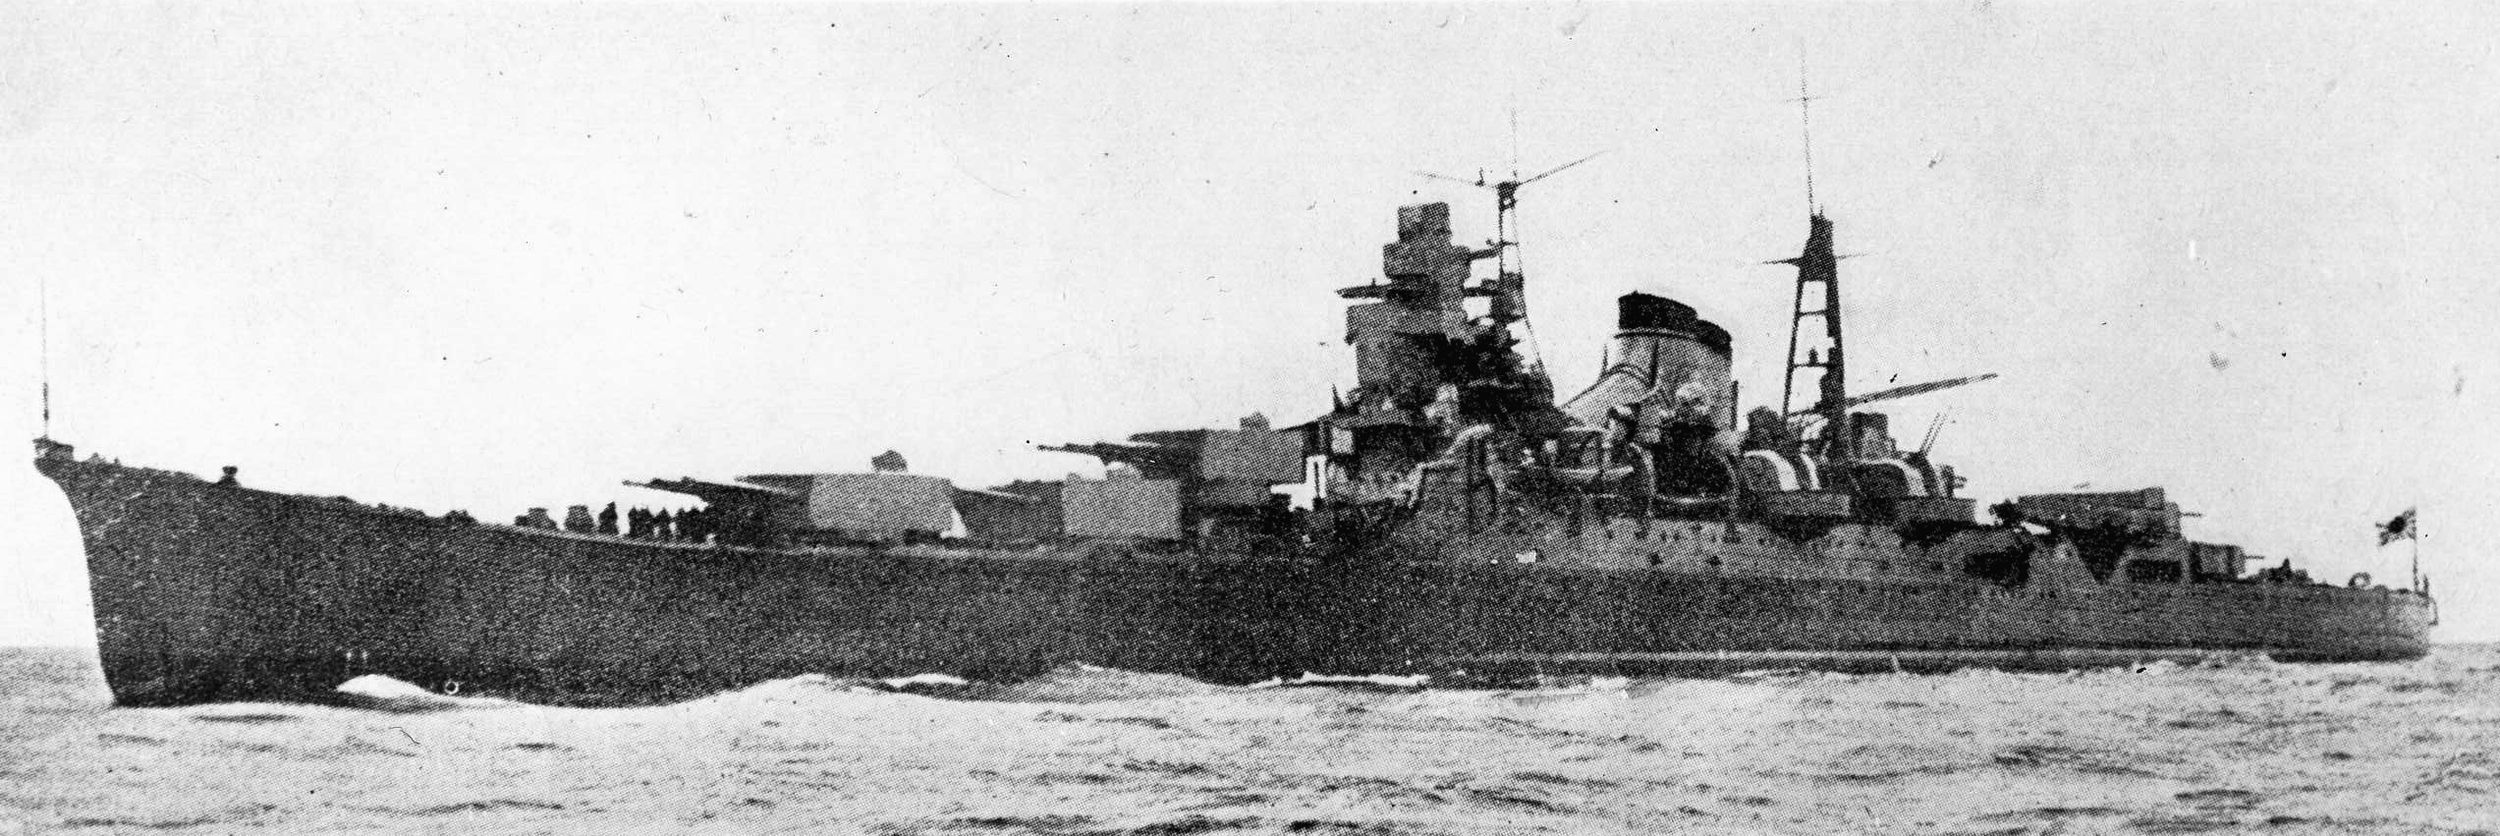 The Japanese cruiser Kumano is shown underway in the Pacific. Its sister, Mogami, and its crew of 850 were put out of action off the coast of Java. 